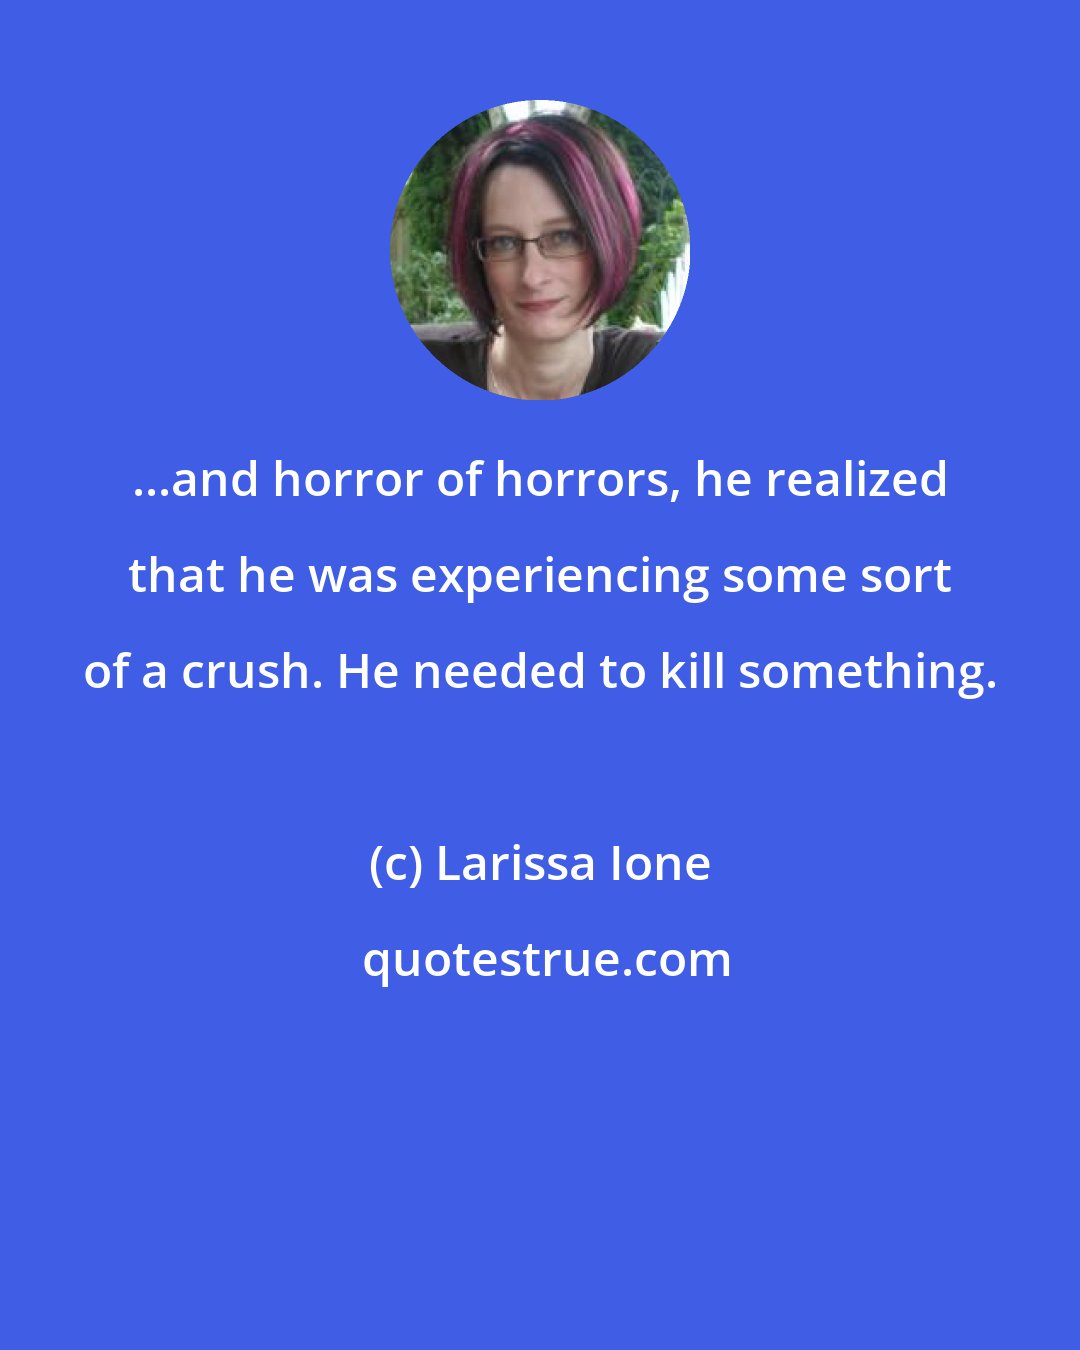 Larissa Ione: ...and horror of horrors, he realized that he was experiencing some sort of a crush. He needed to kill something.